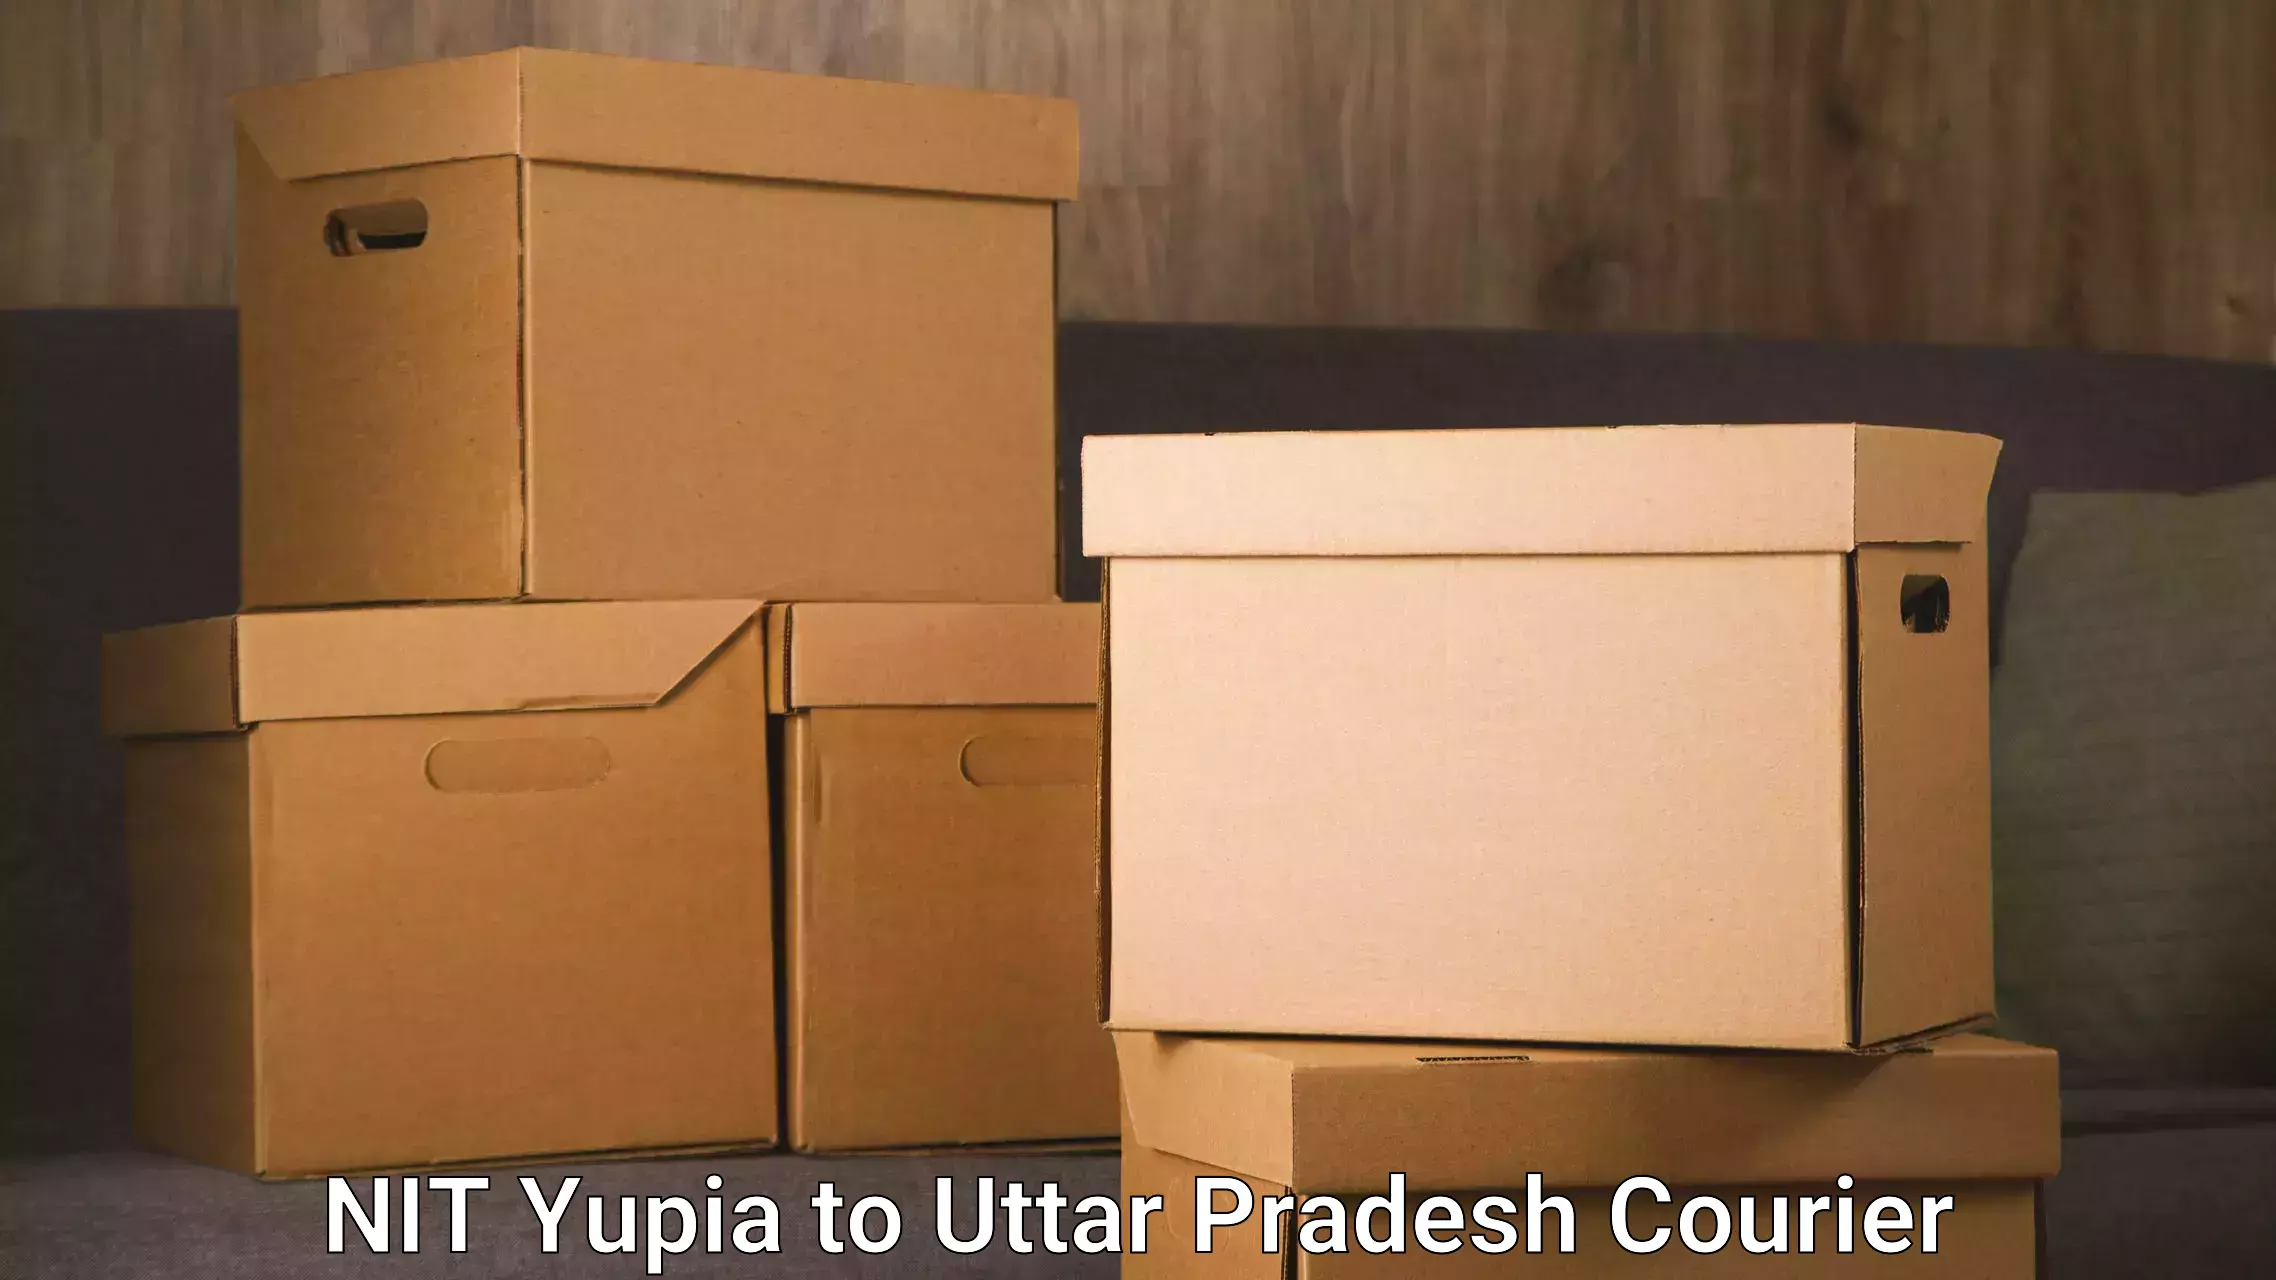 Quality courier services NIT Yupia to Agra